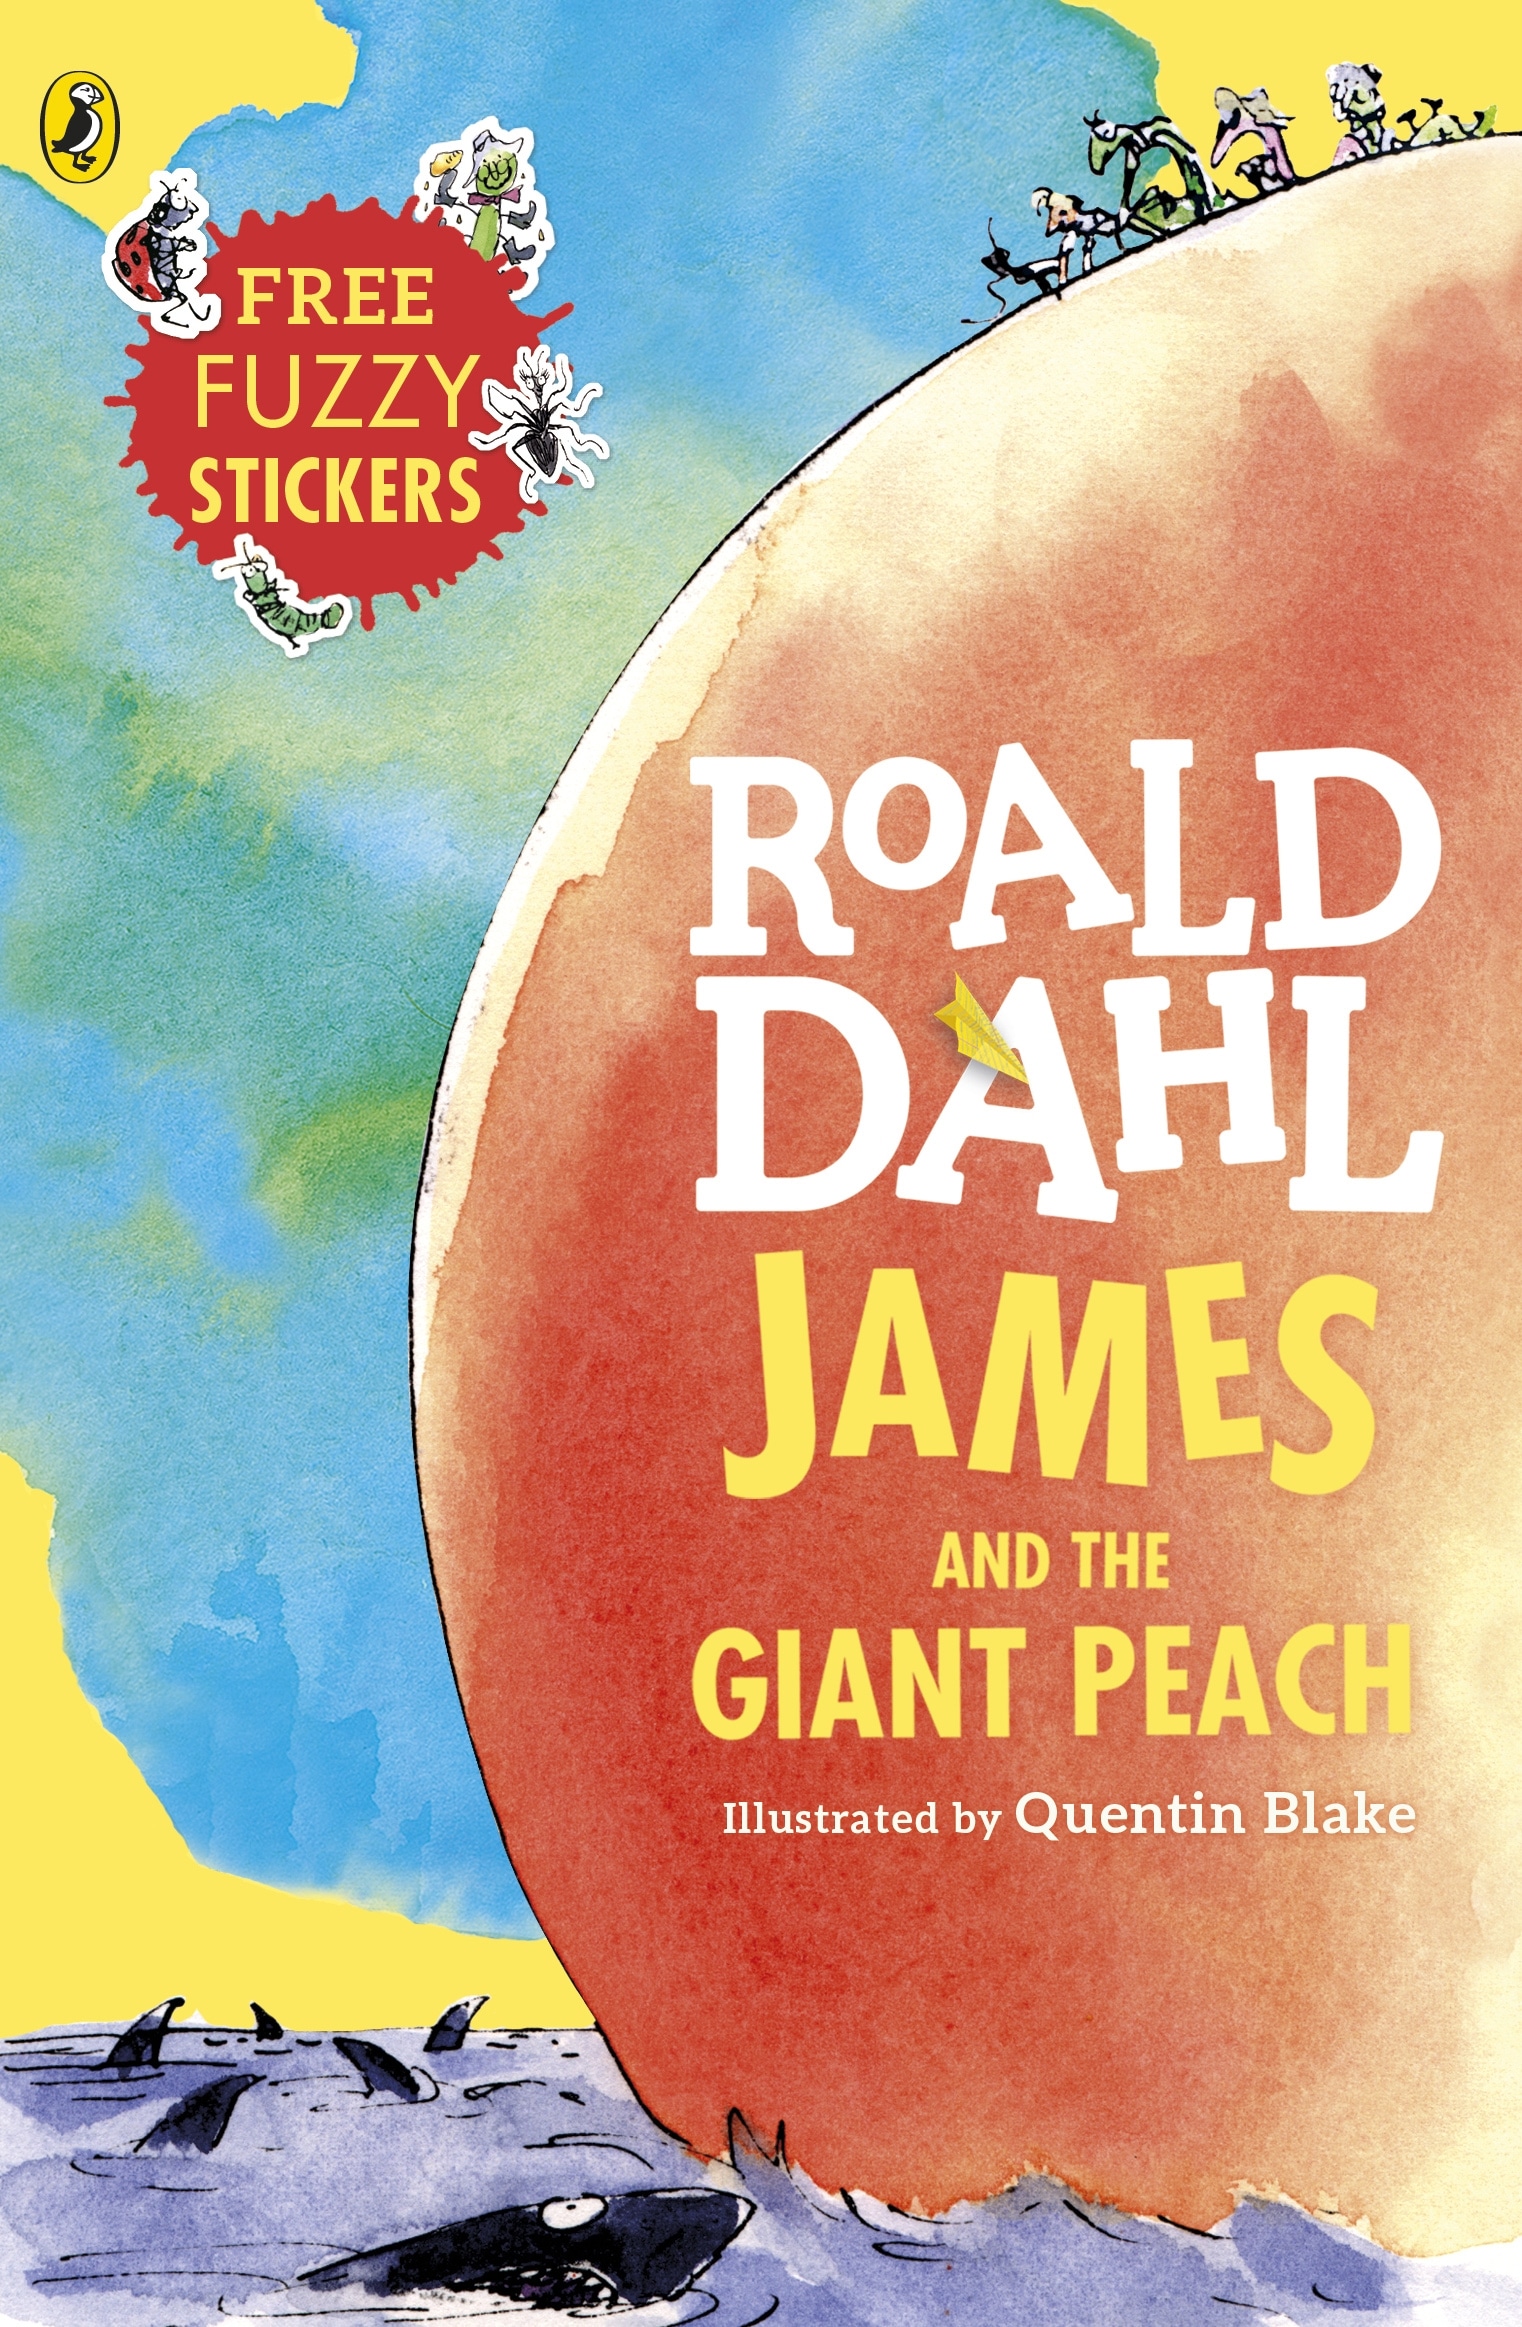 Book “James and the Giant Peach” by Roald Dahl — September 6, 2007